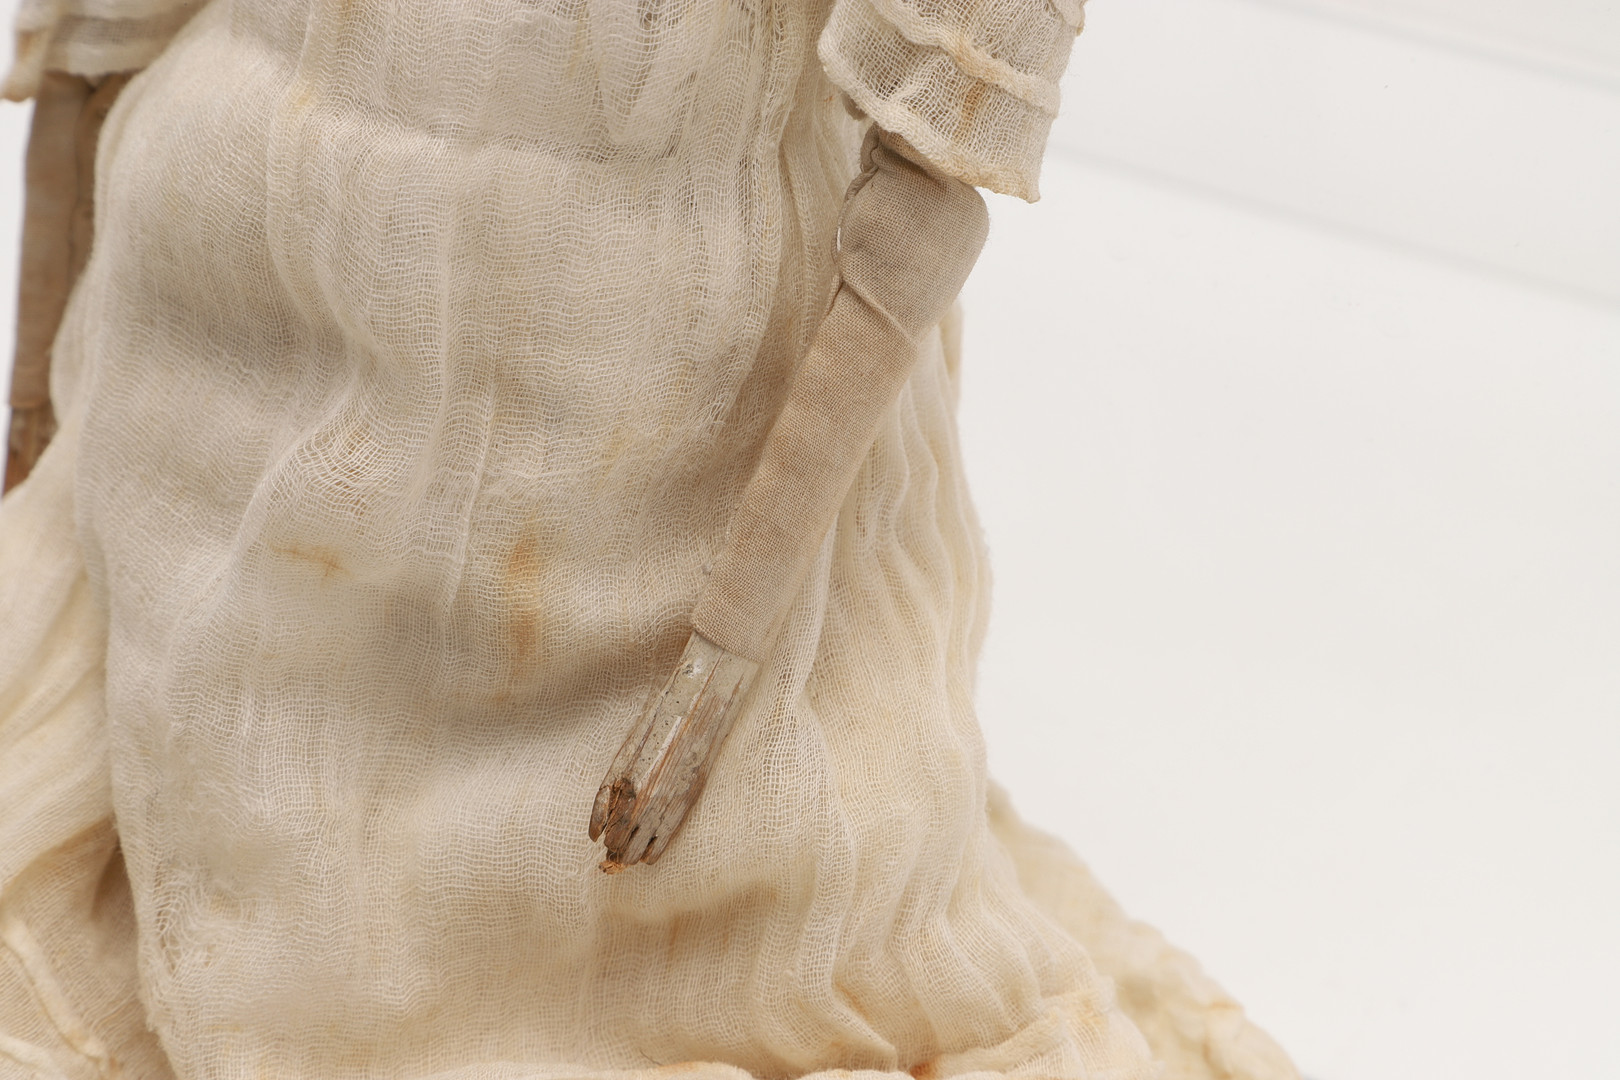 A LATE 18TH CENTURY WOODEN PEG DOLL. - Image 5 of 30